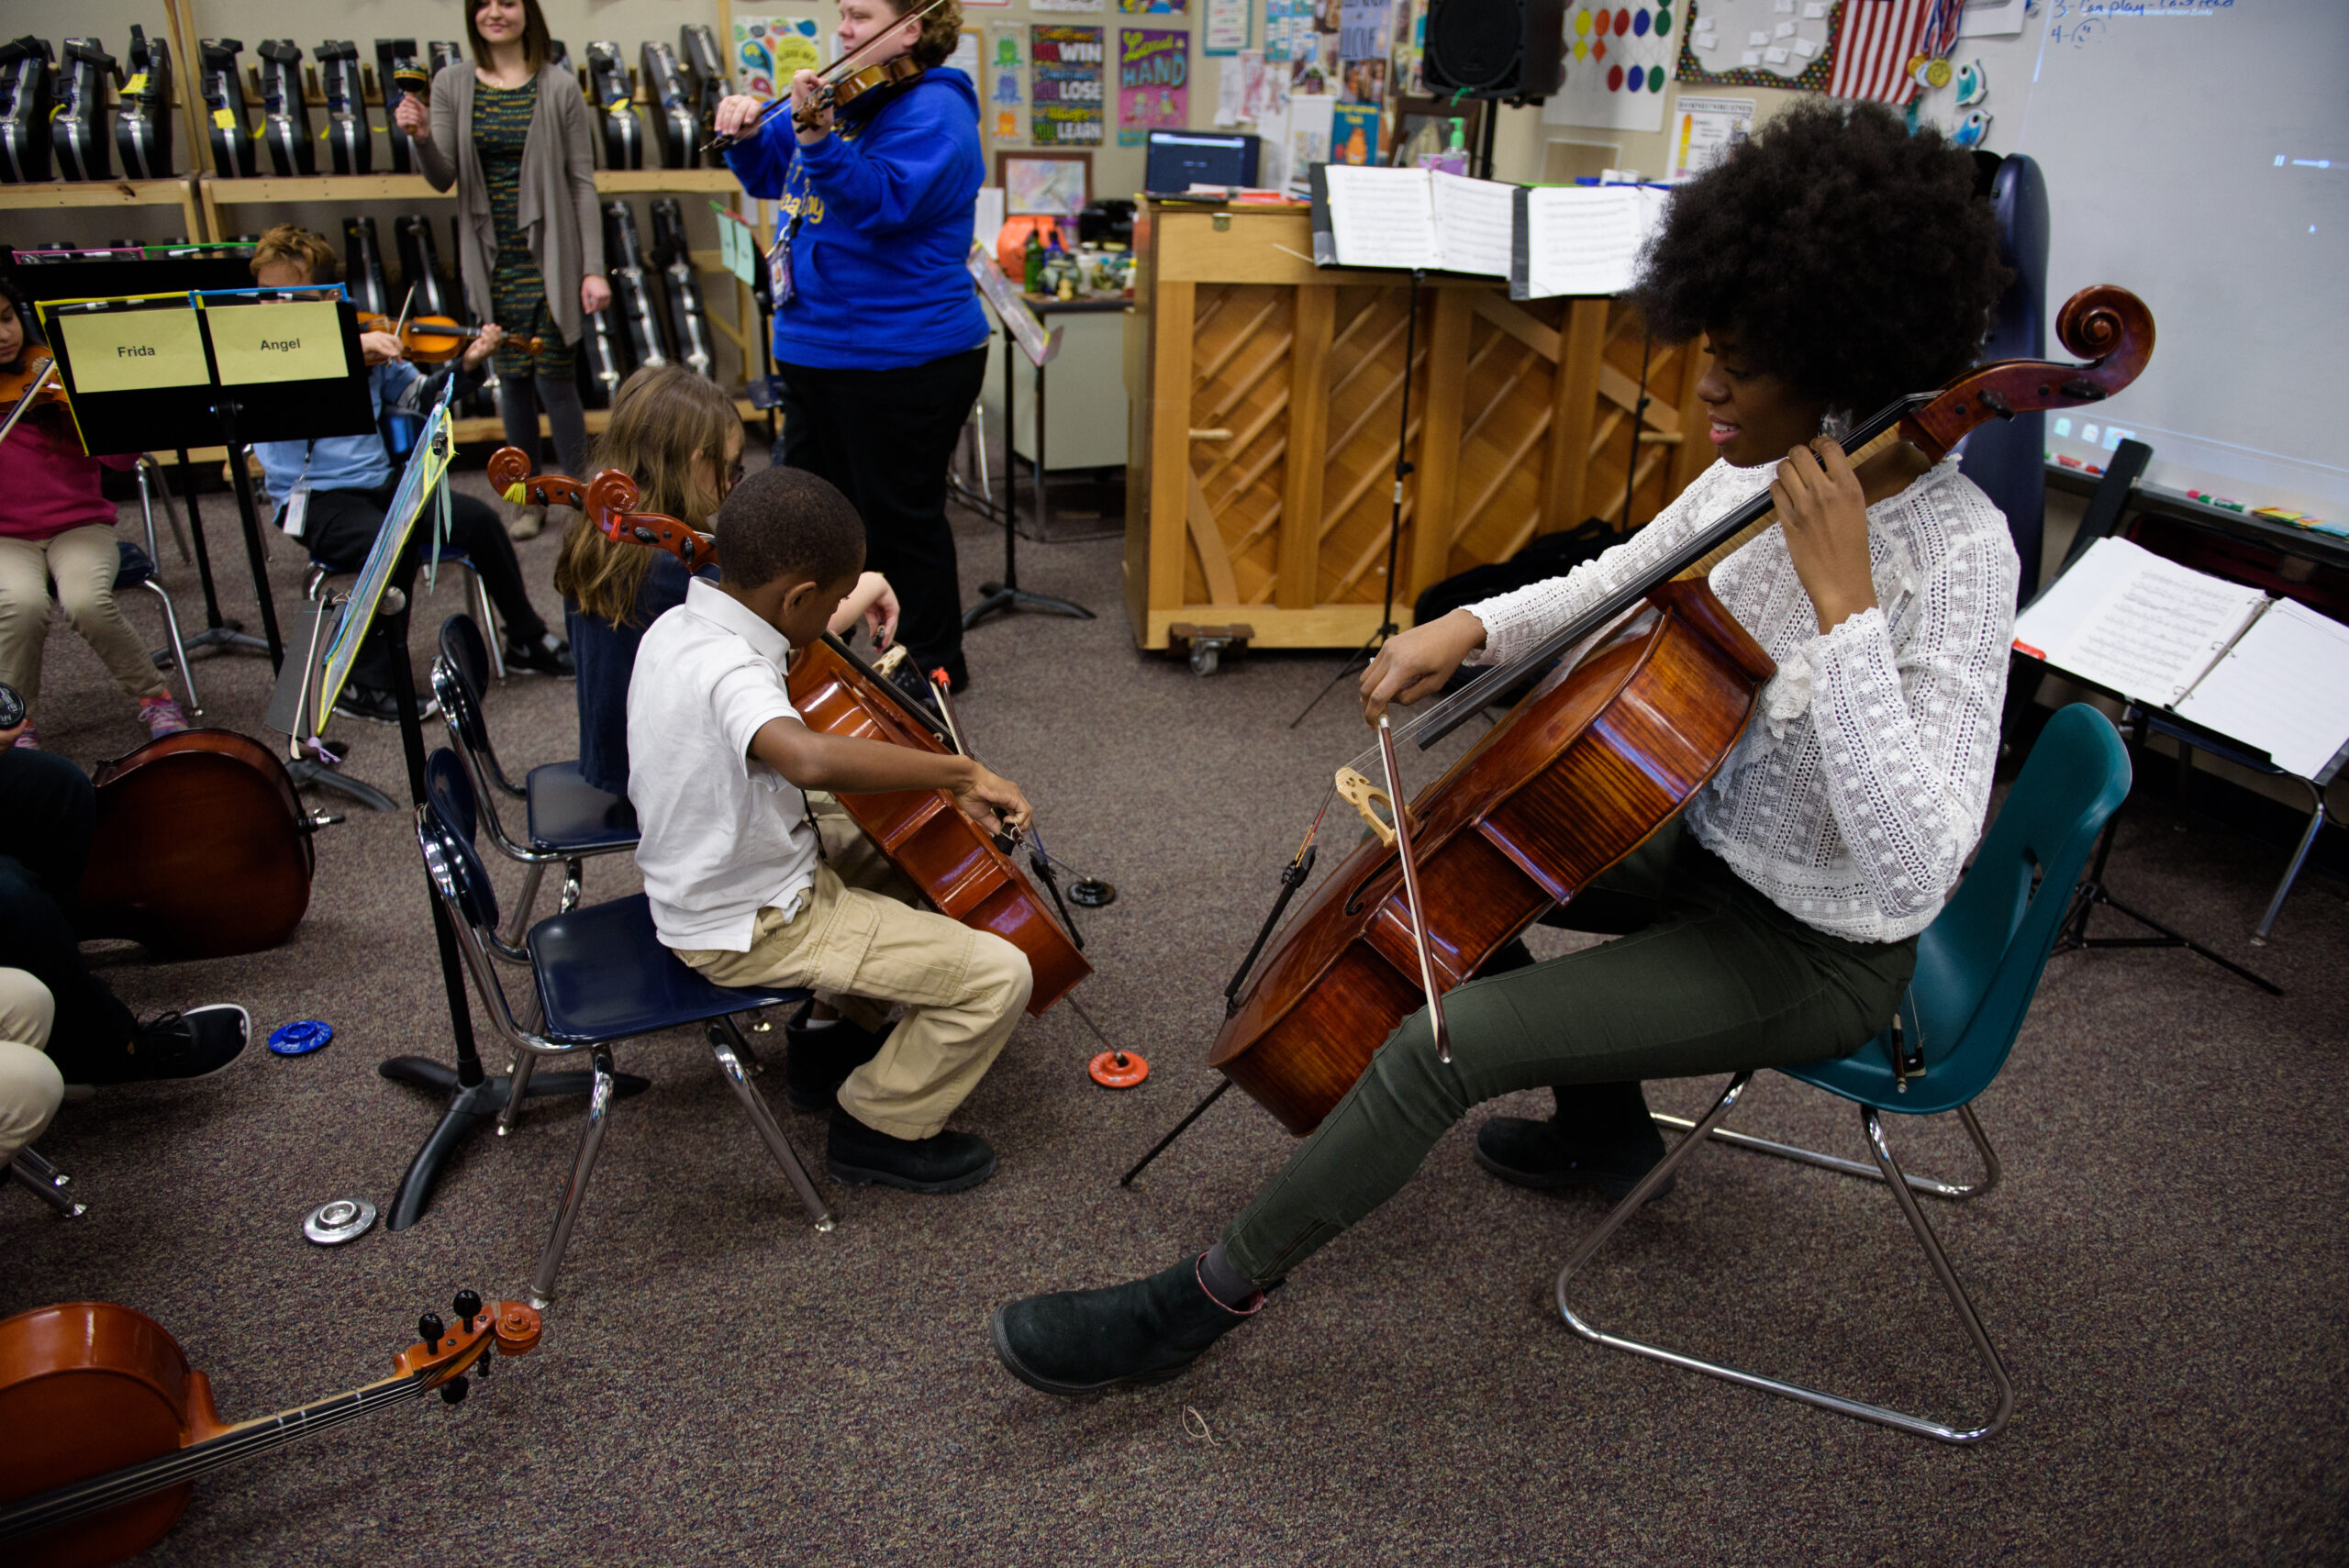 Fischoff’s educational programs enrich the musical and cultural life of the community through personal interaction with musicians of the highest caliber. Since 1995, Fischoff’s educational outreach programs have reached over 93,500 children and youth throughout Northern Indiana and Southwestern Michigan, placing a particular emphasis on underserved and at-risk communities.